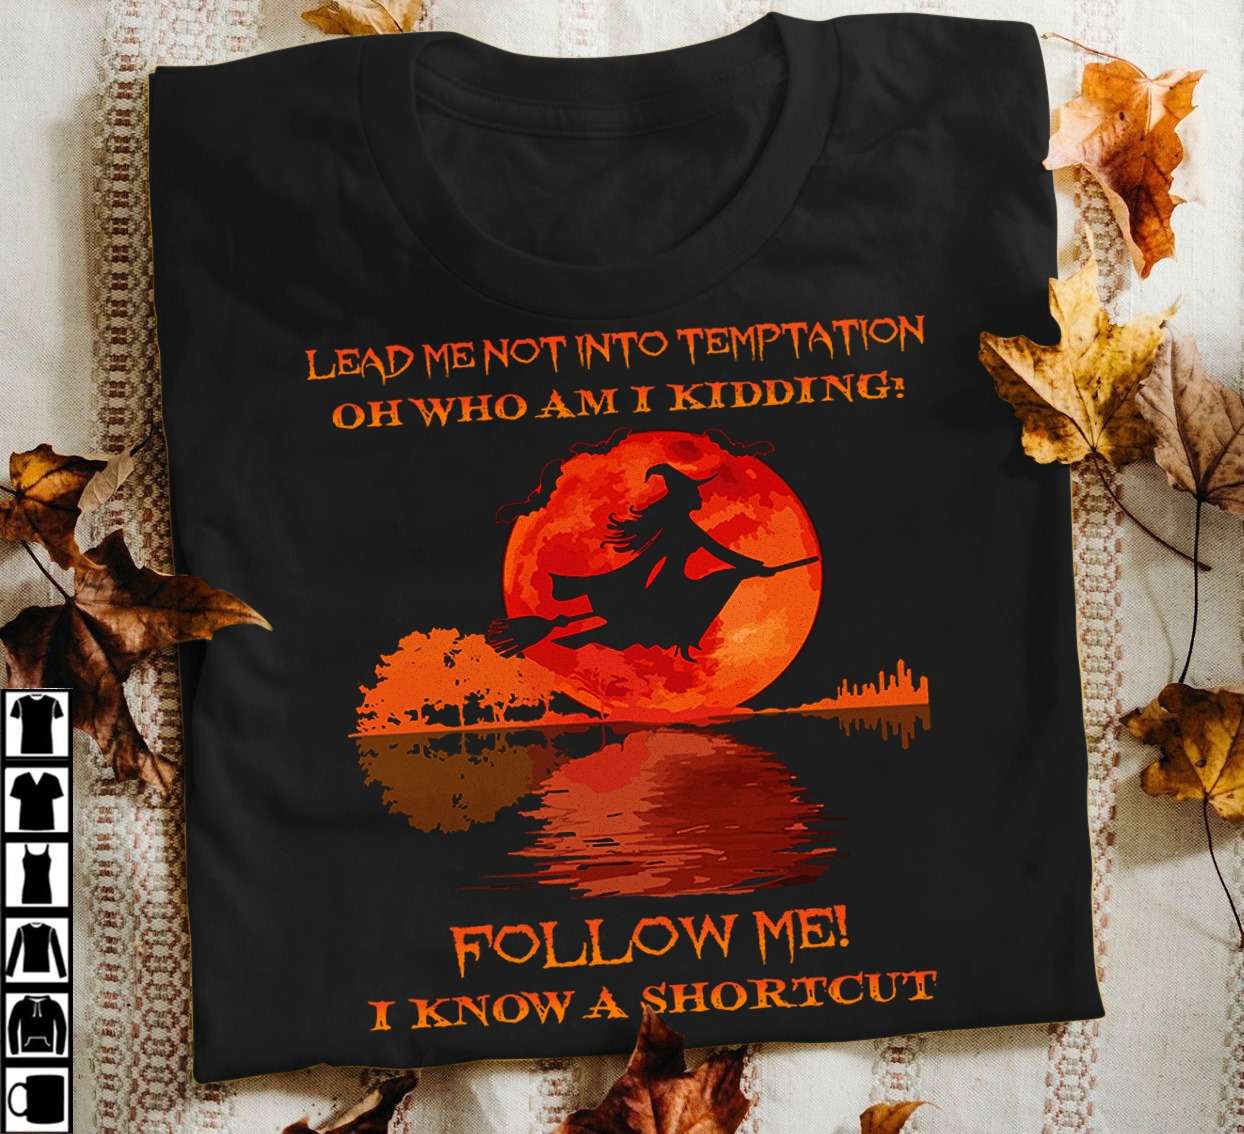 Witch Riding Broom - Lead me not into temptation oh who am i kidding follow me i know a shortcut